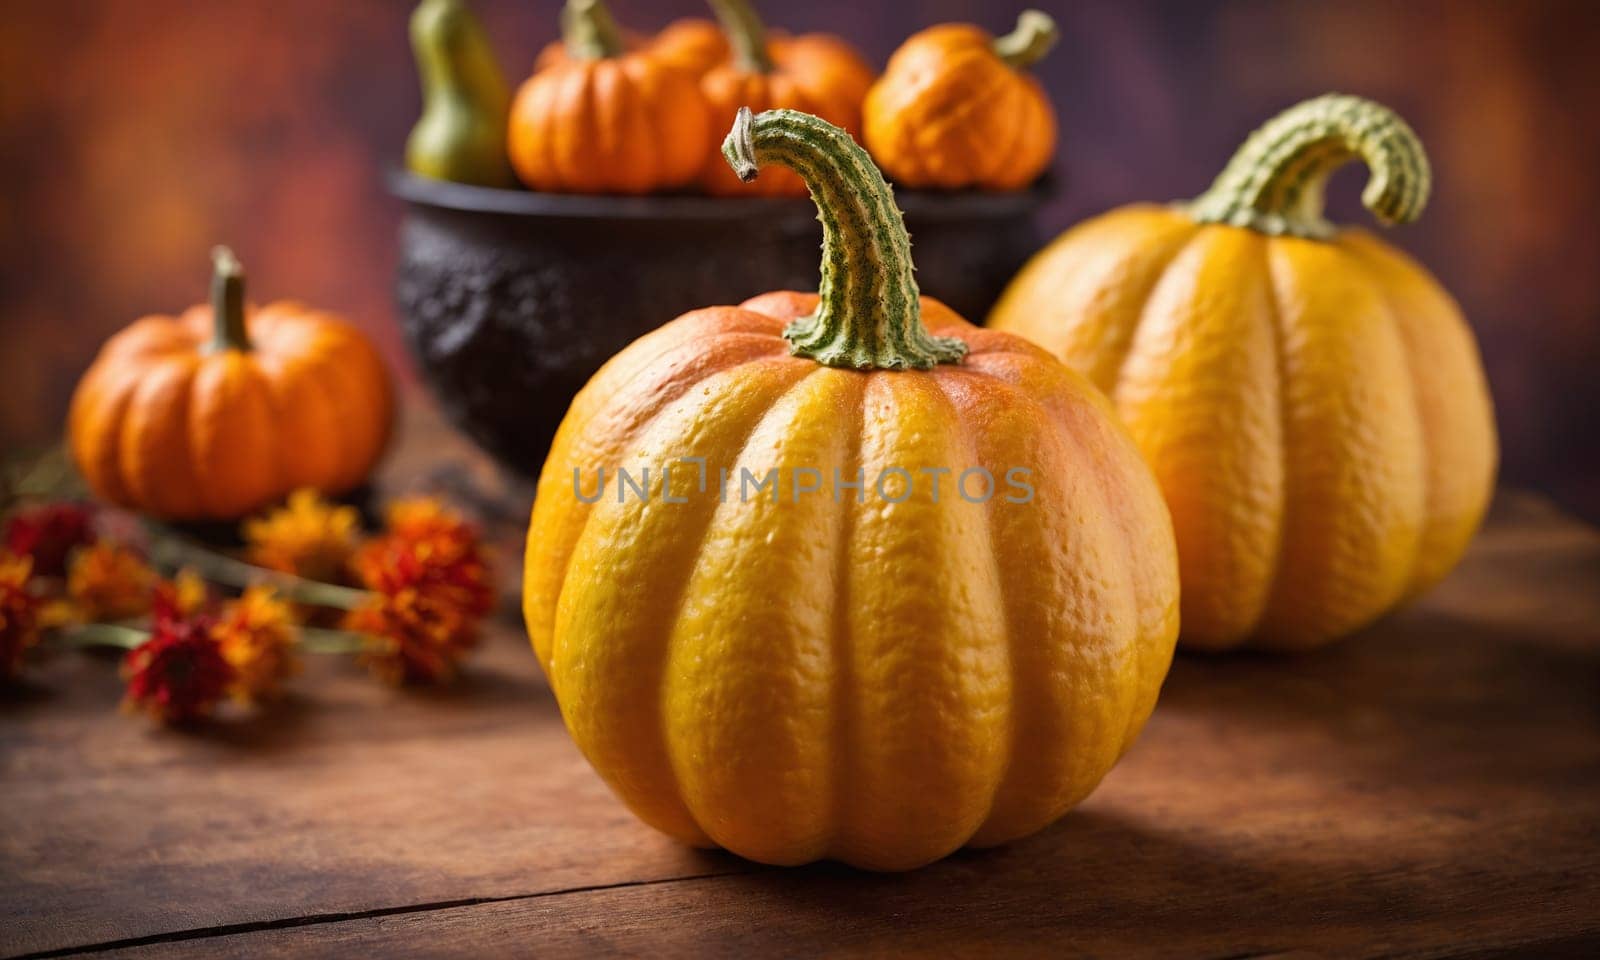 A cluster of ripe pumpkins, also known as calabaza, resting on a rustic wooden table. Considered a staple food, this winter squash is a type of gourd and a whole, natural food